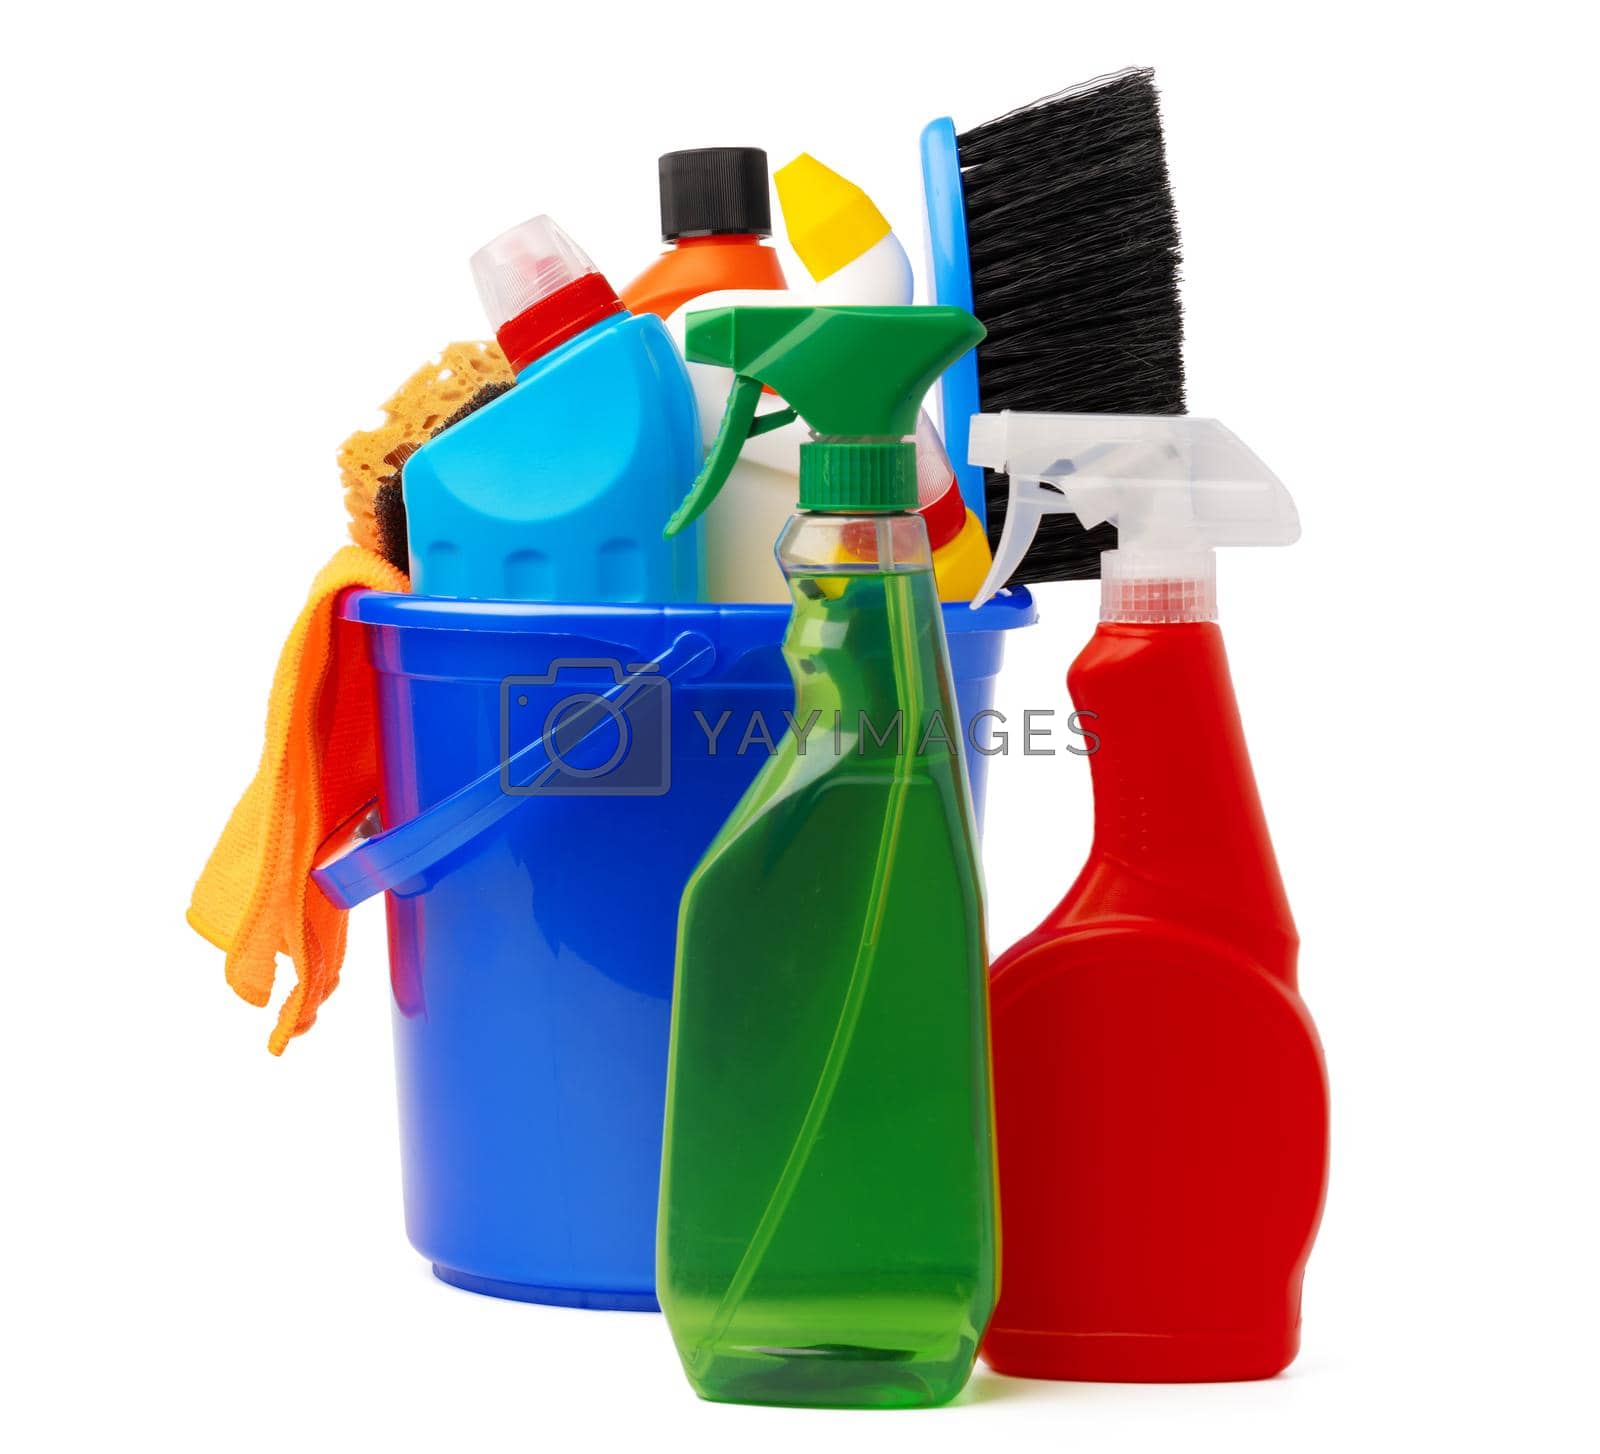 Royalty free image of Liquid detergents and cleaning supplies in plastic bucket on white background by Fabrikasimf